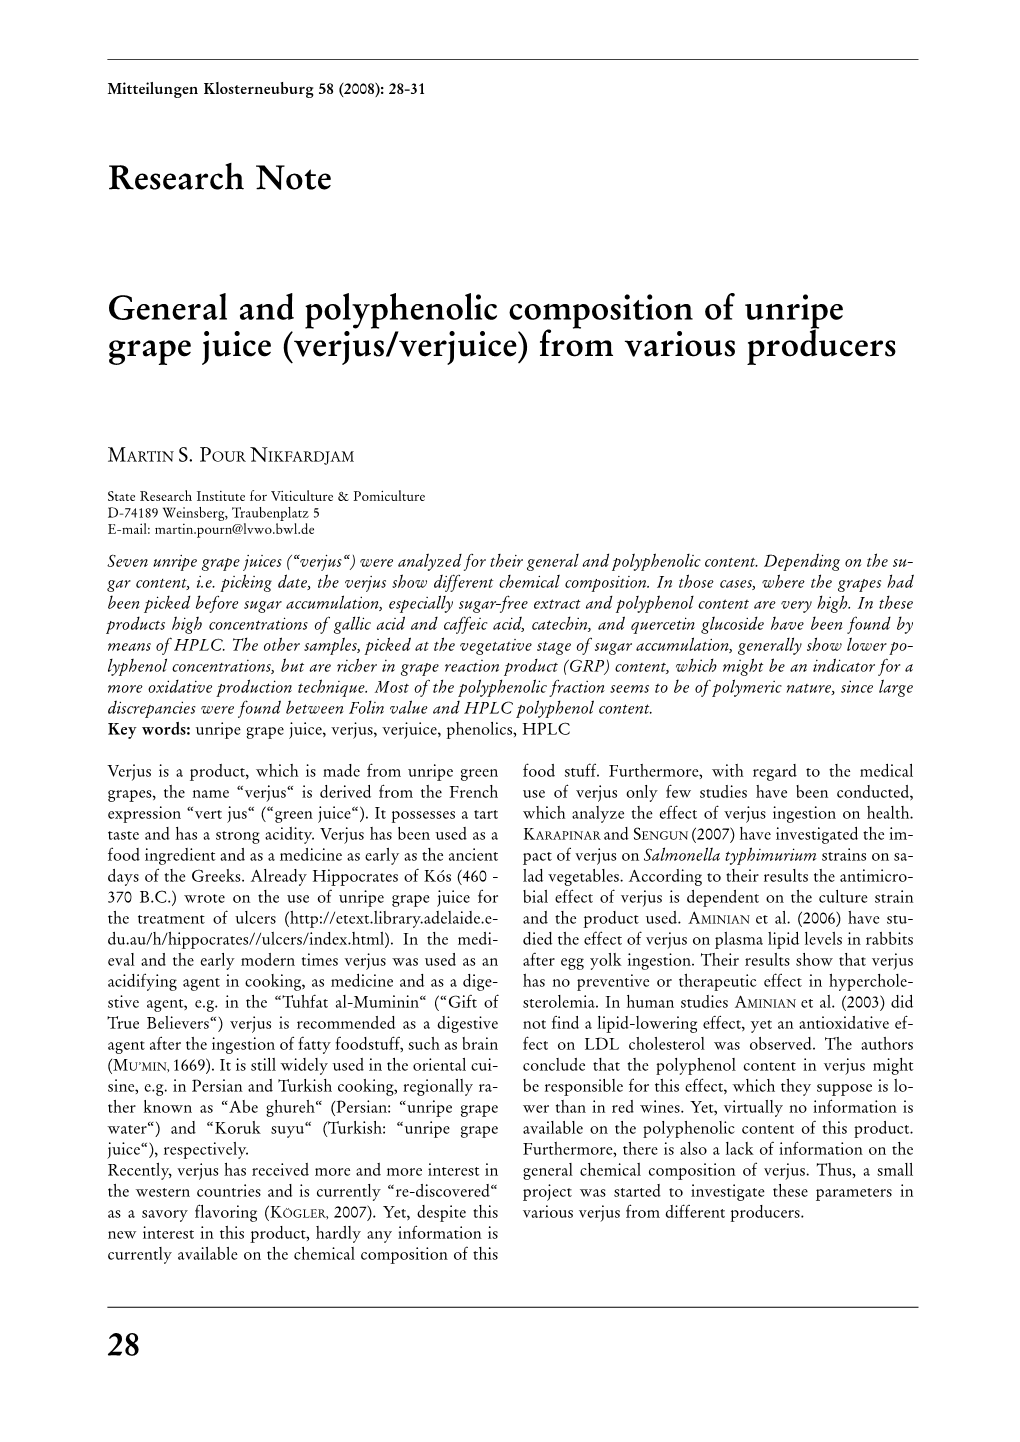 General and Polyphenolic Composition of Unripe Grape Juice (Verjus/Verjuice) from Various Producers Research Note